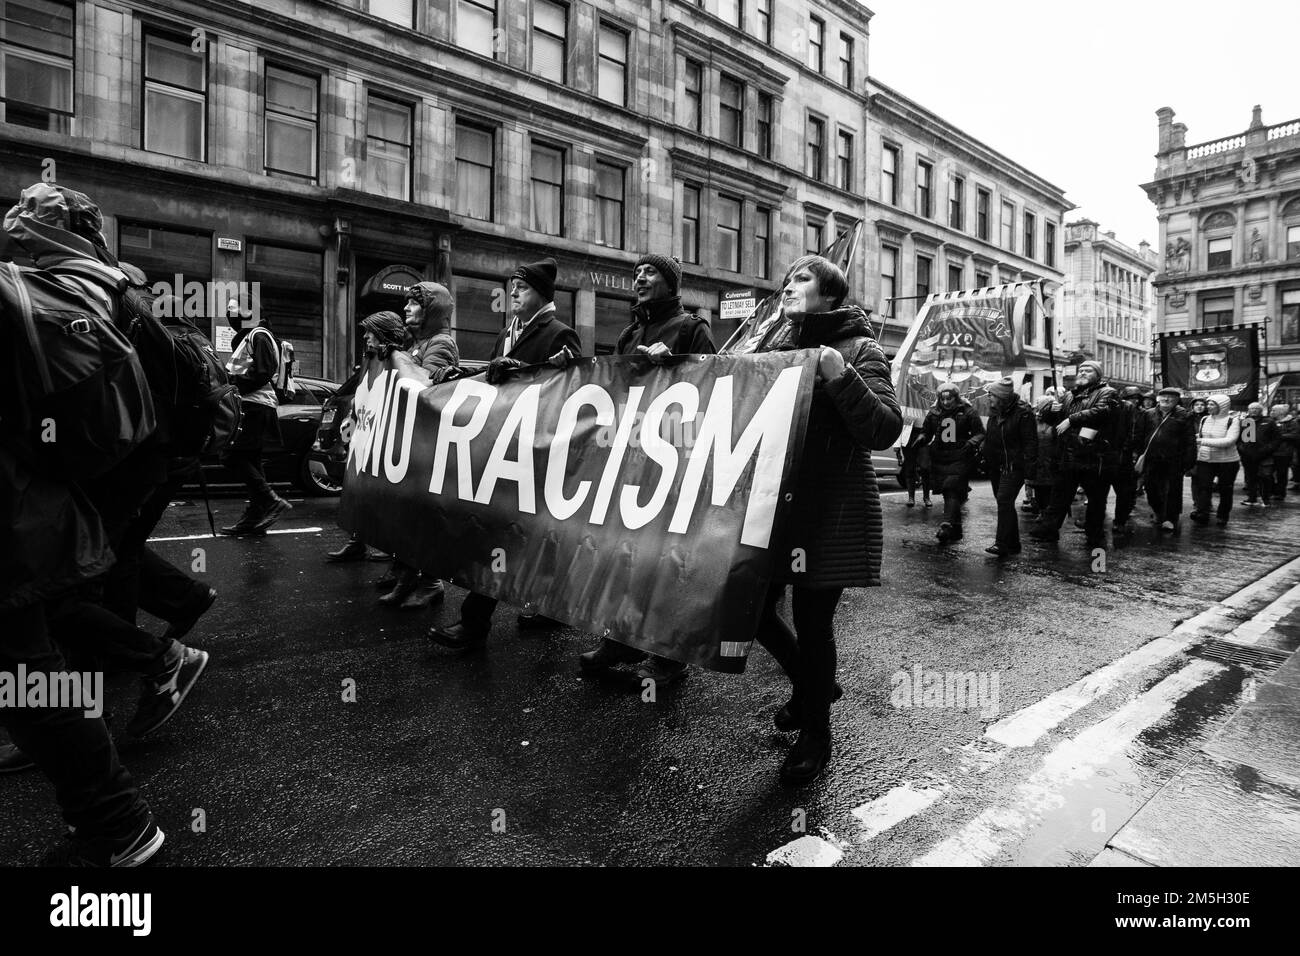 These images are from the Scottish Trades Union Congress St Andrews Day Anti Racism march which took place from Glasgow Green to Bath Street Stock Photo